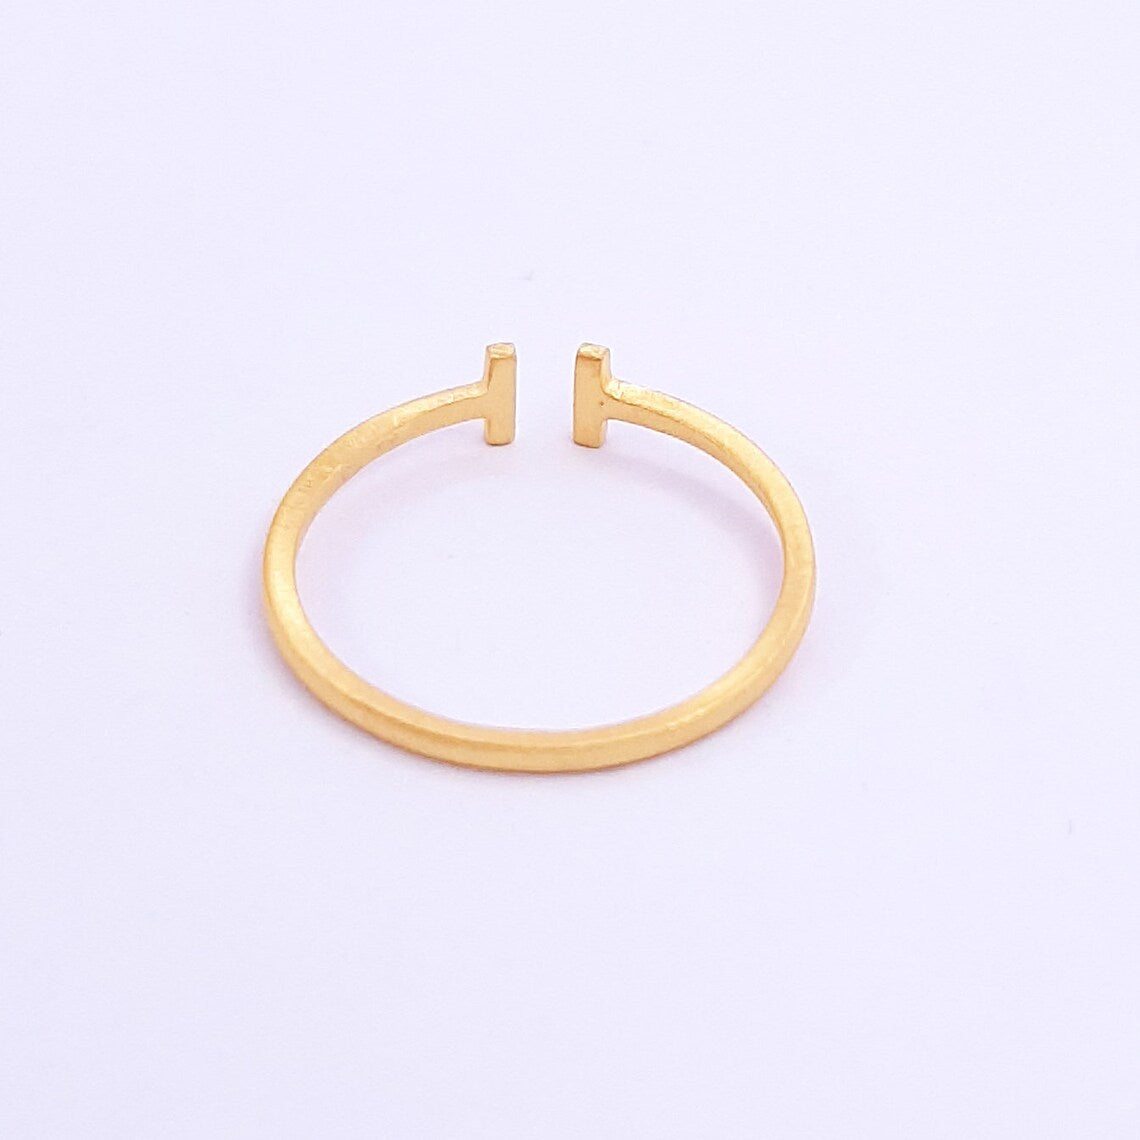 925 Silver Adjustable Open Ring, Gold Plated Stacking Ring Minimalist Heart Ring, Sterling Silver Ring